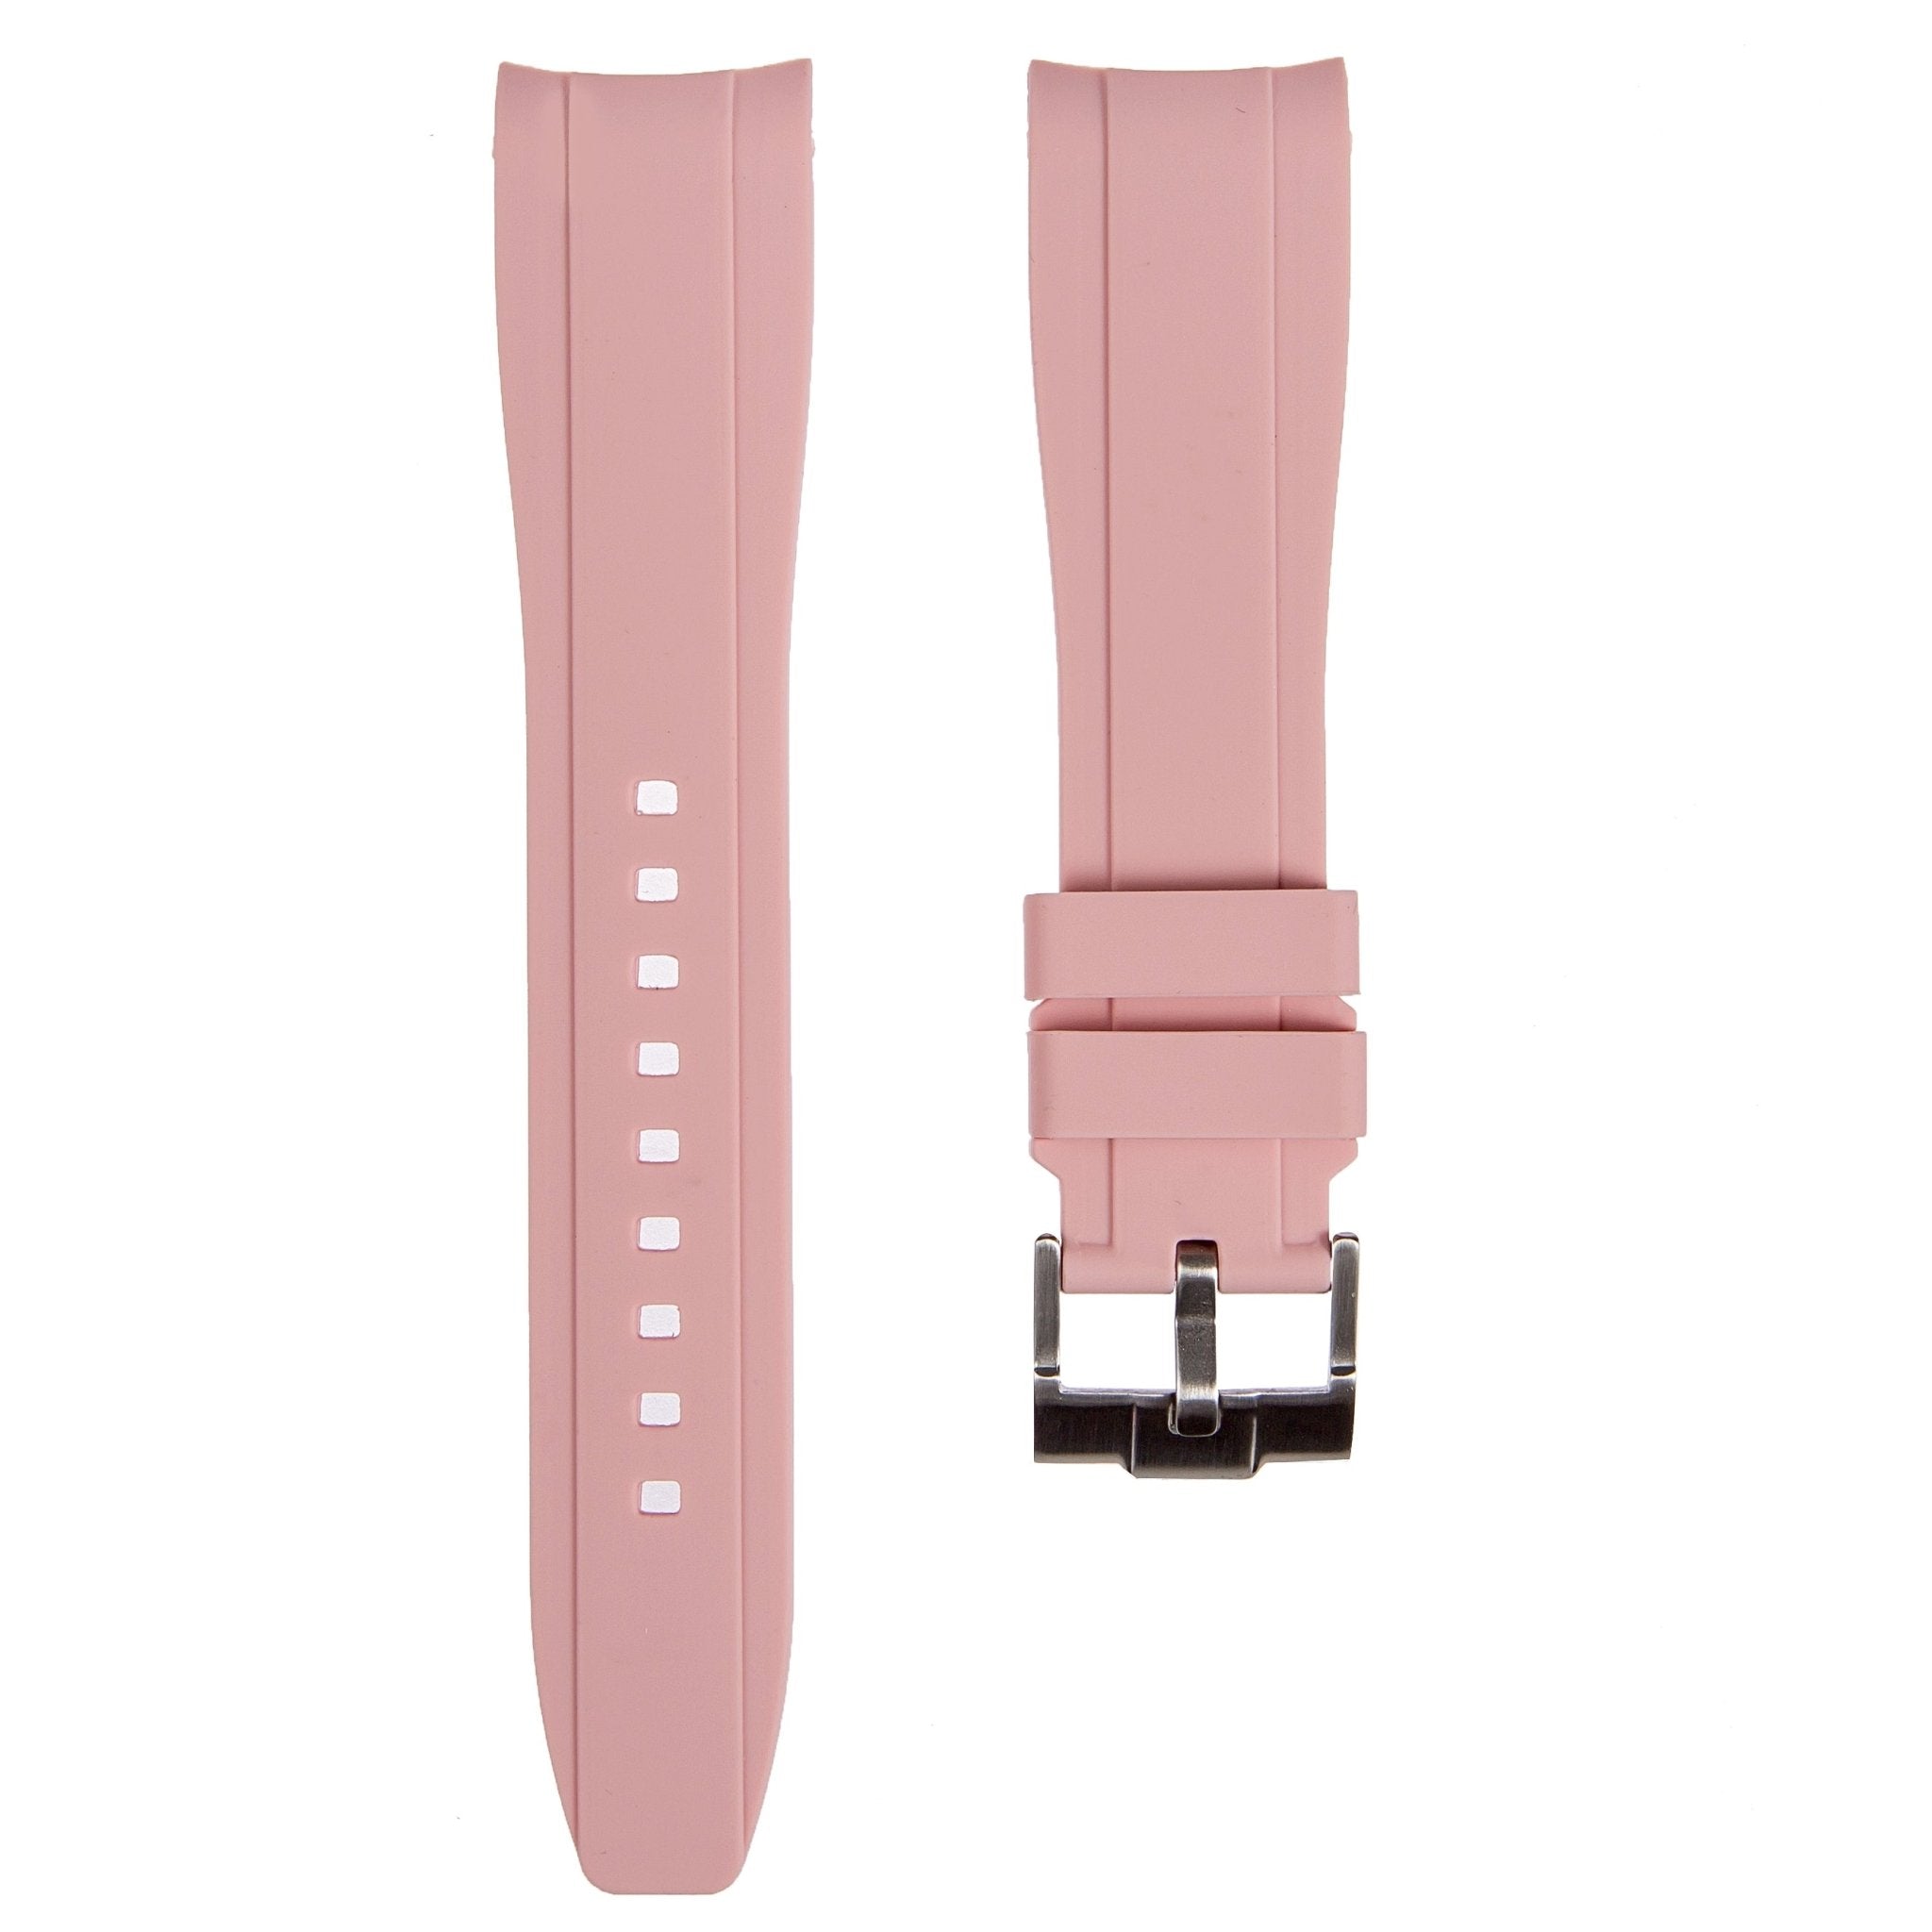 Curved End Soft Silicone Strap - Compatible with Orient Kamasu - Light Pink (2418) -StrapSeeker